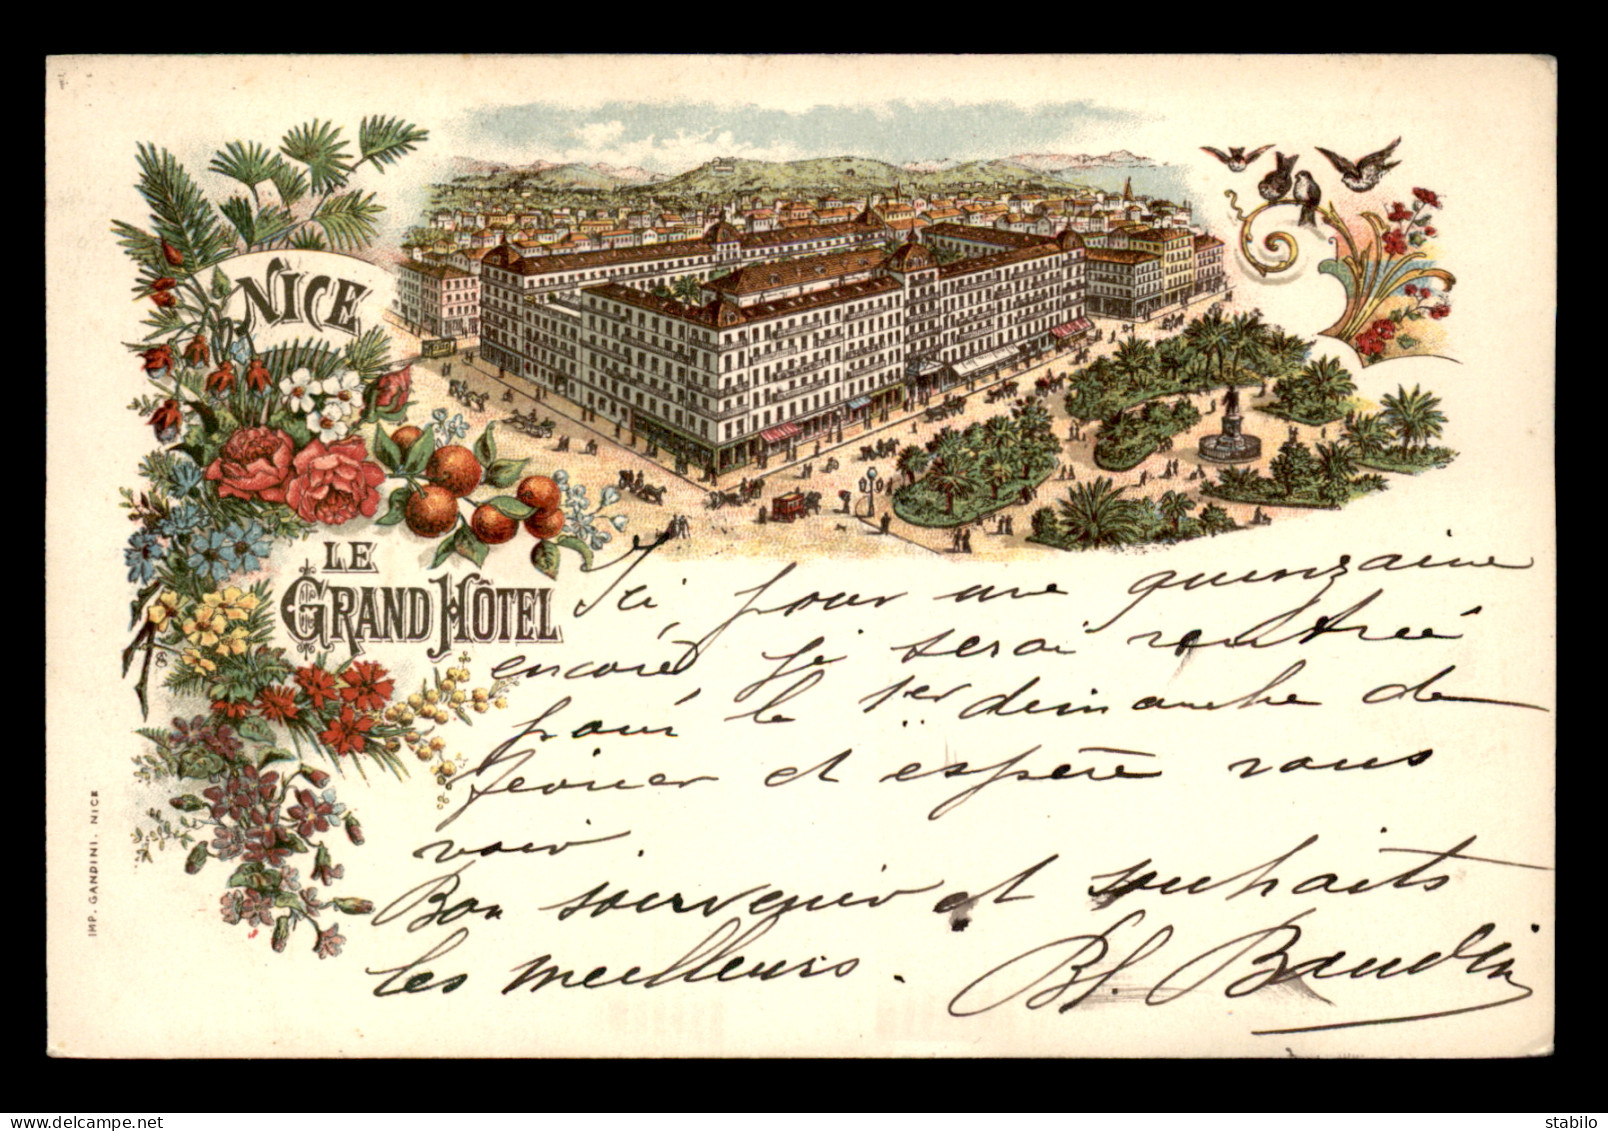 06 - NICE - LE GRAND HOTEL - CARTE ILLUSTREE STYLE GRUSS AUS - Pubs, Hotels And Restaurants